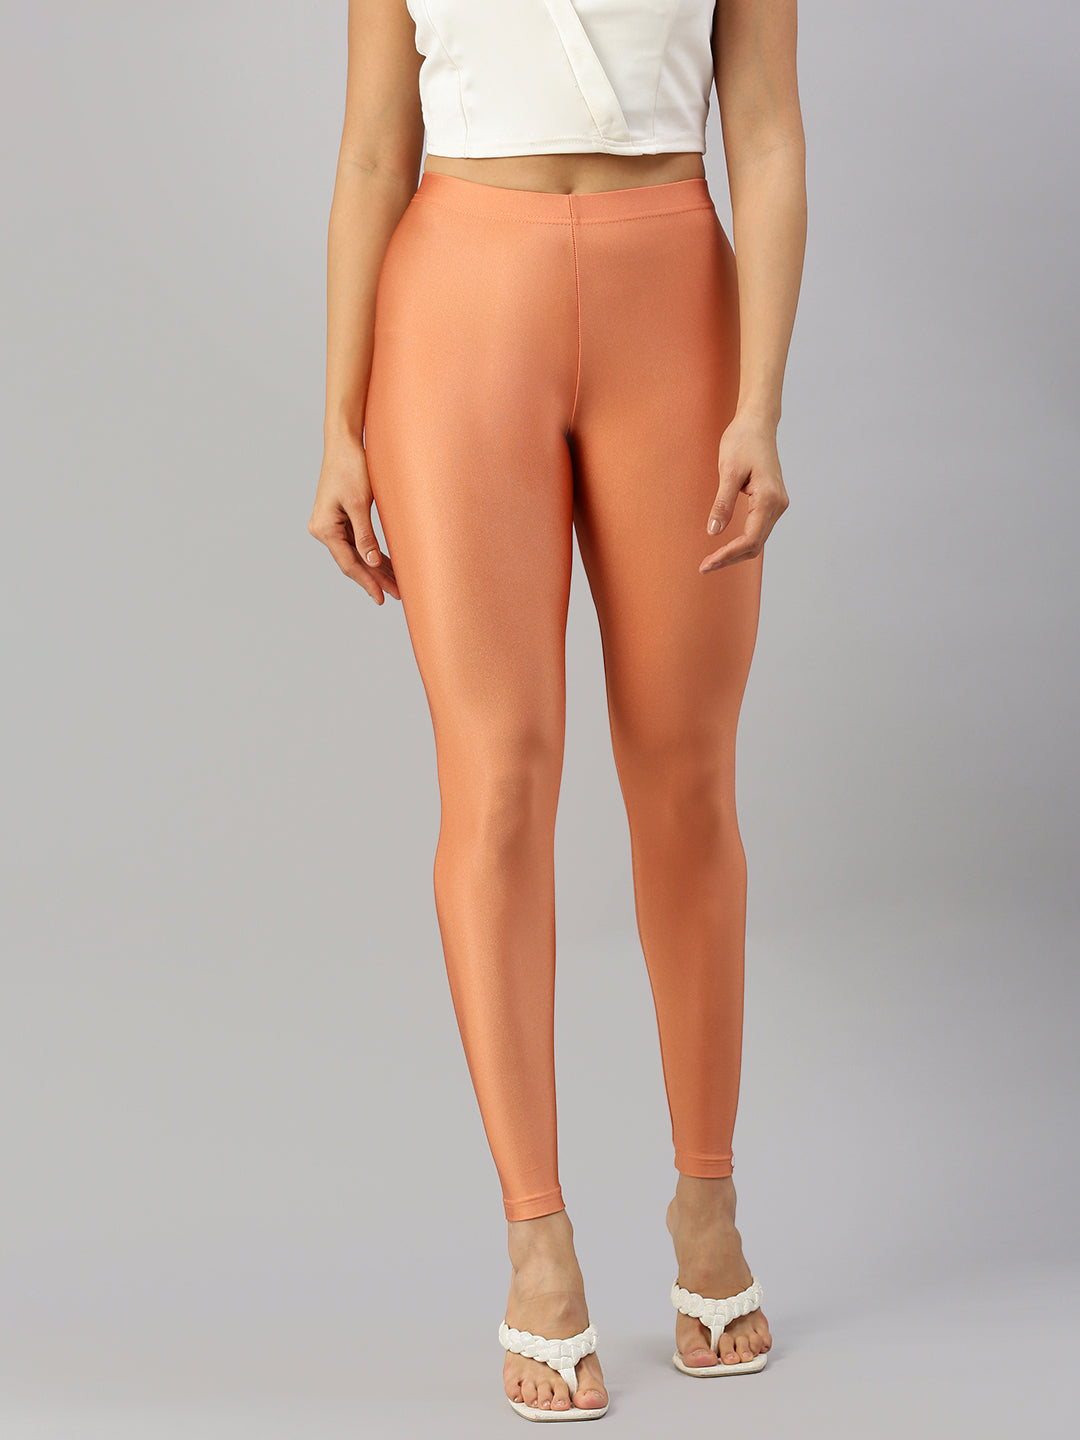 Prisma Shimmer Leggings in Super Copper for a Chic Look